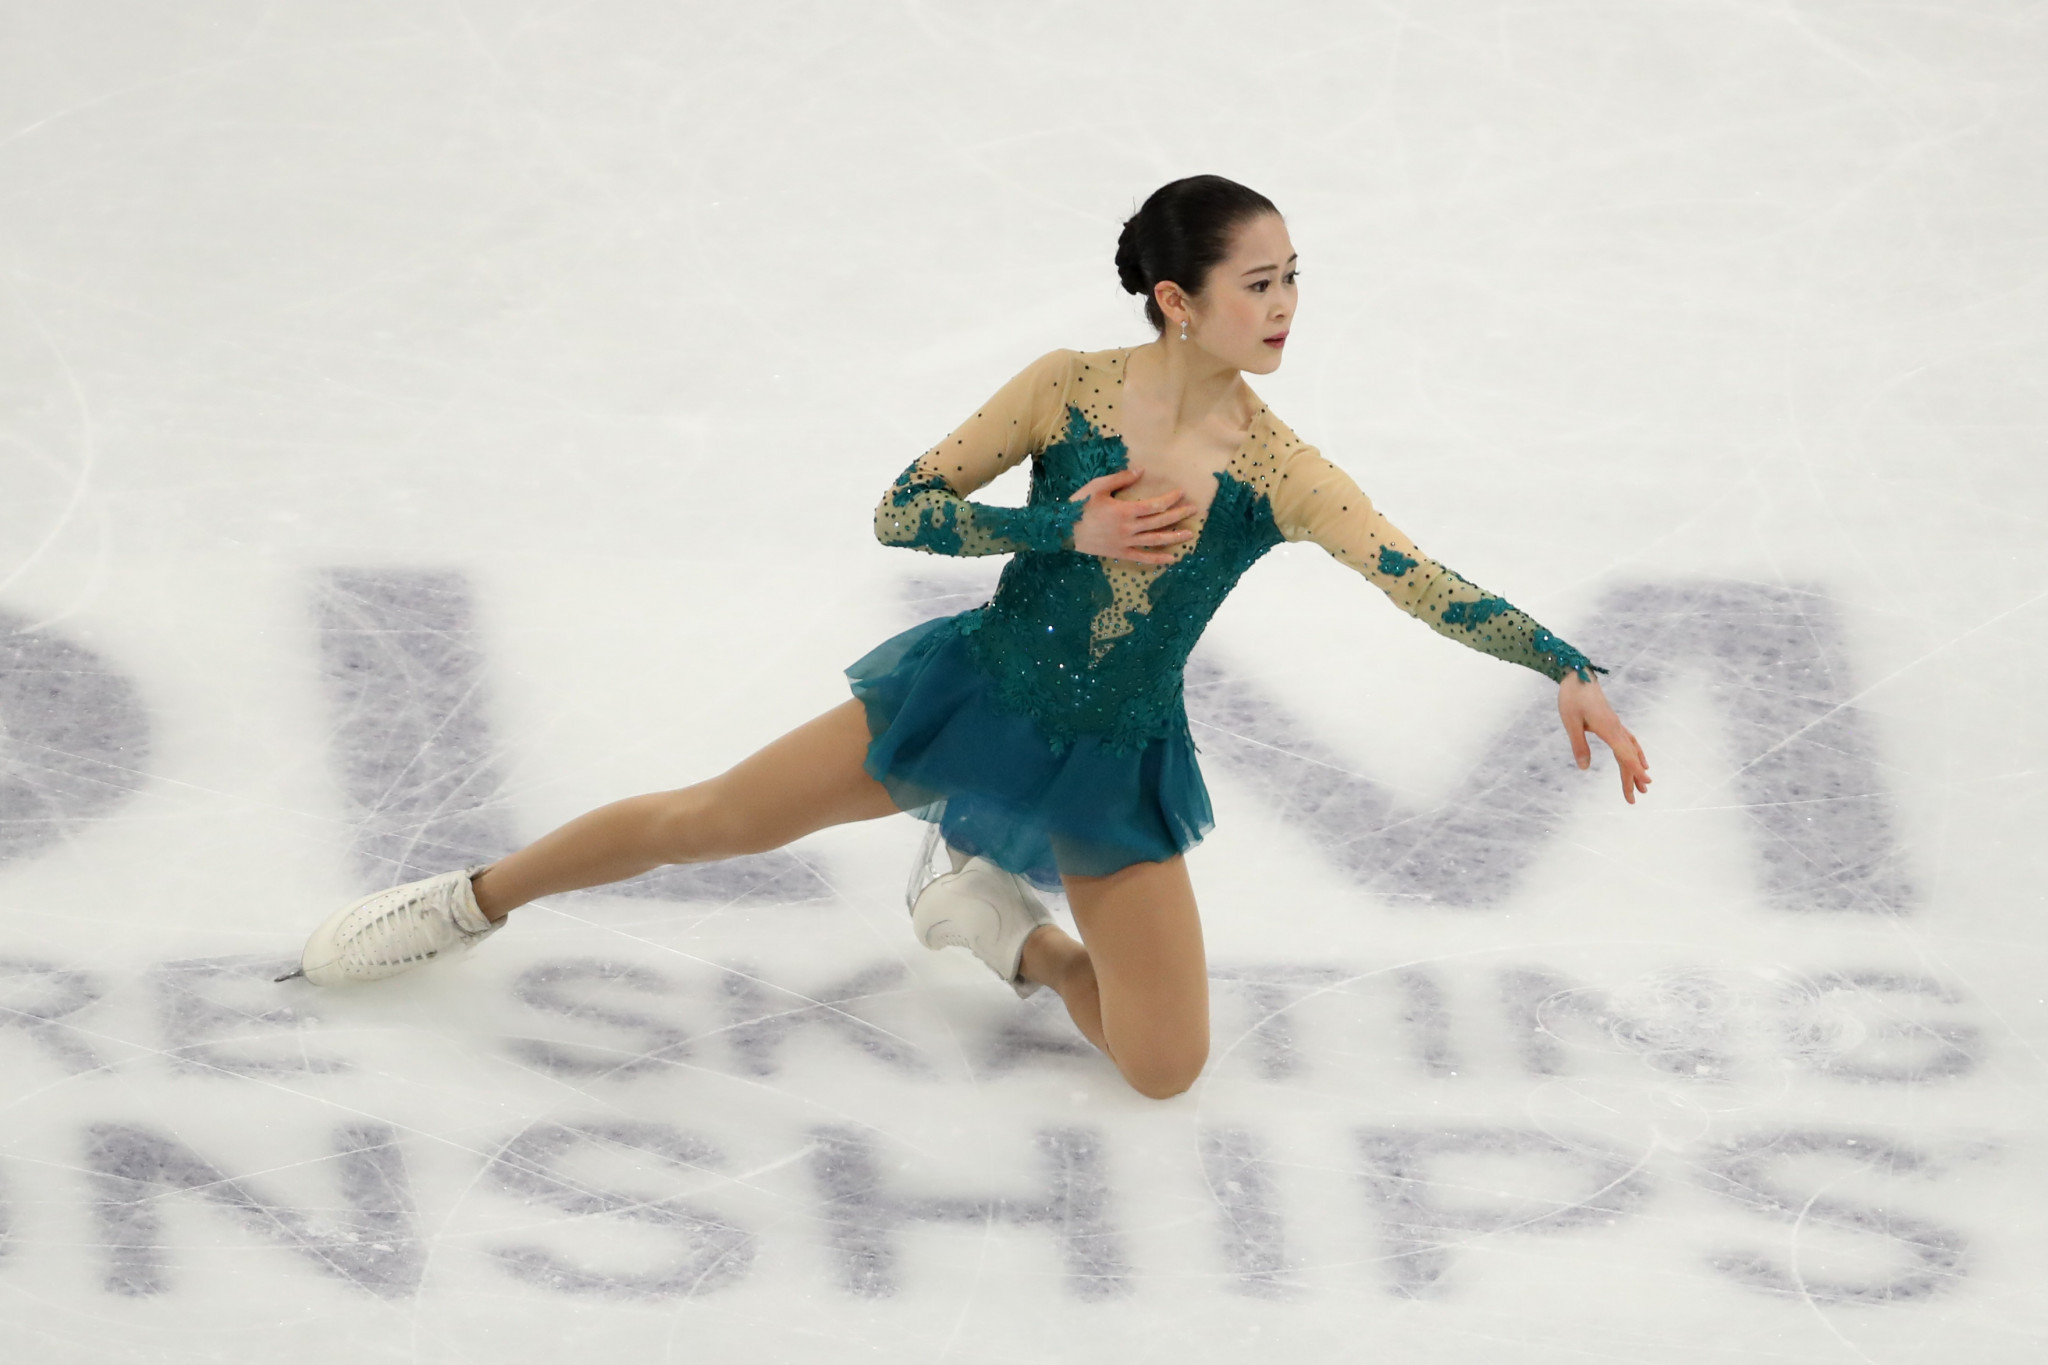 Satoko Miyahara achieved two world medals in her career, claiming silver in 2015 and bronze in 2018 ©Getty Images